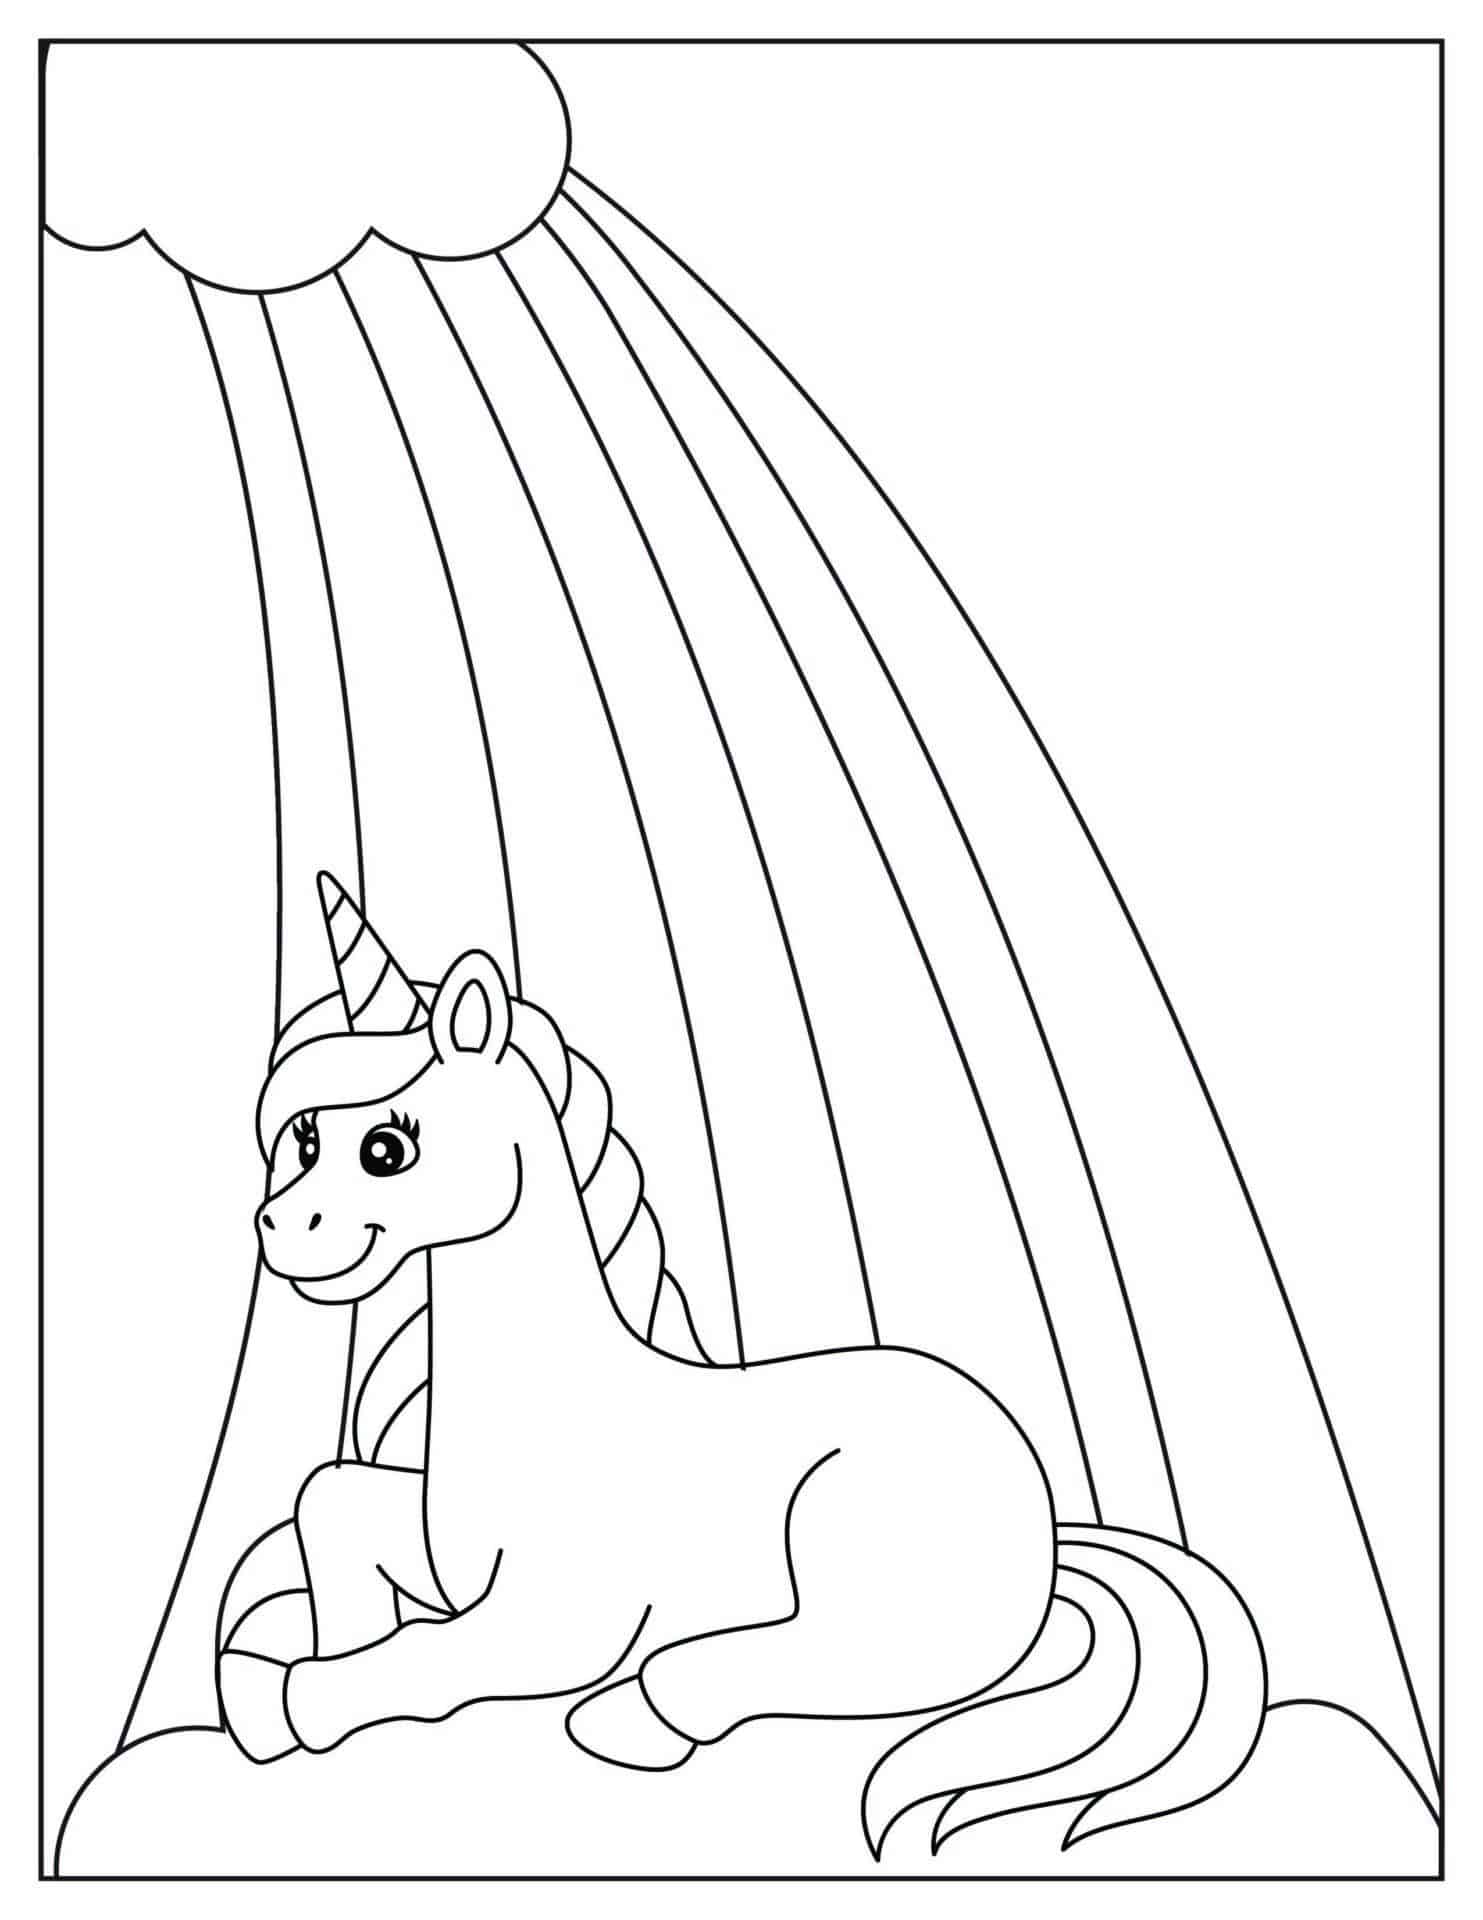 unicorn rainbow printable free coloring pages